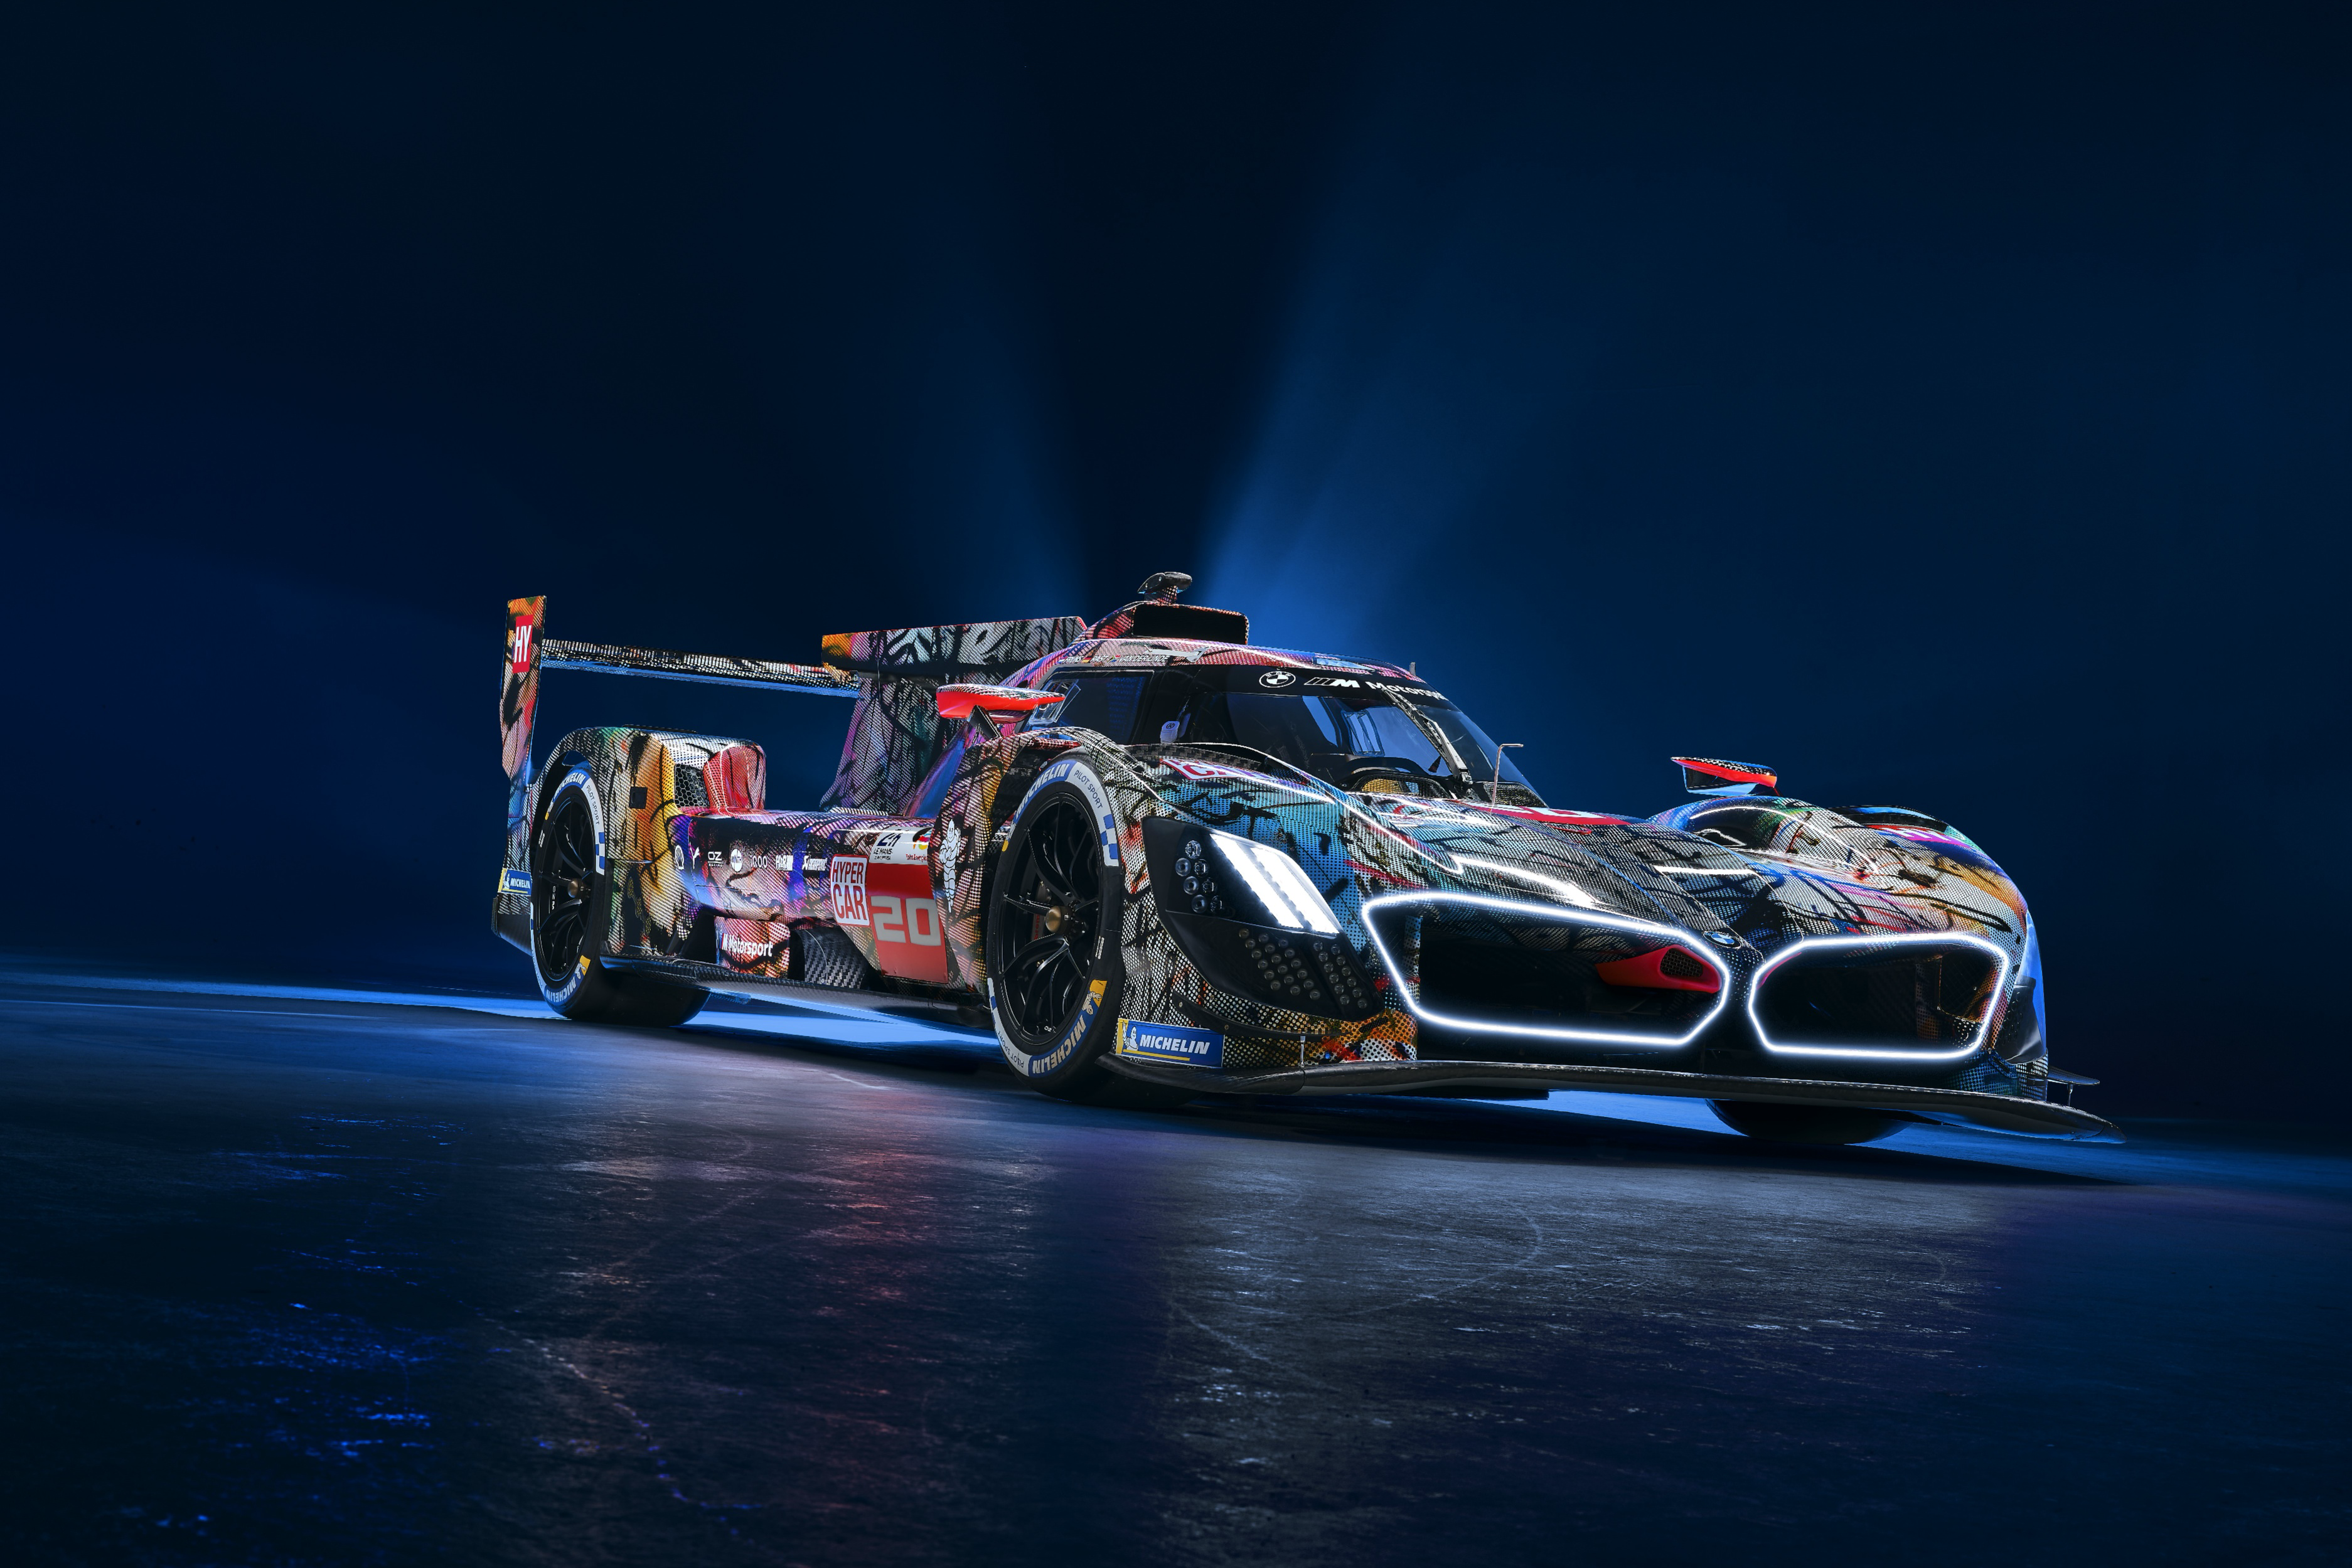  The 20th BMW art car ushered in the global debut in Paris